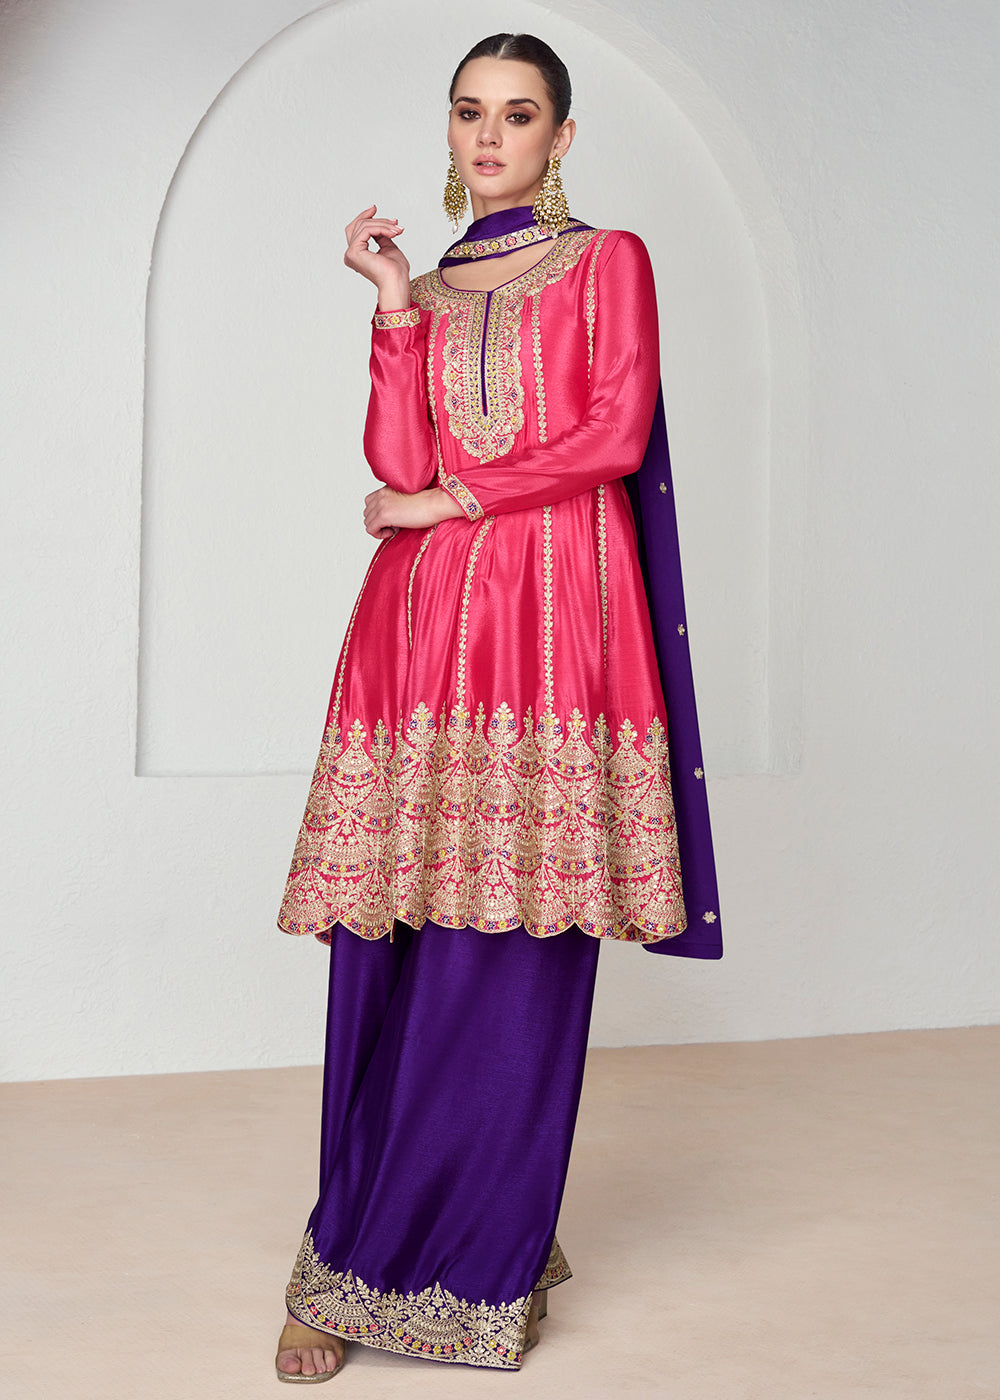 Buy Now Hot Pink & Purple Premium Chinnon Silk Palazzo Suit Online in USA, UK, Canada, Germany, Australia & Worldwide at Empress Clothing.